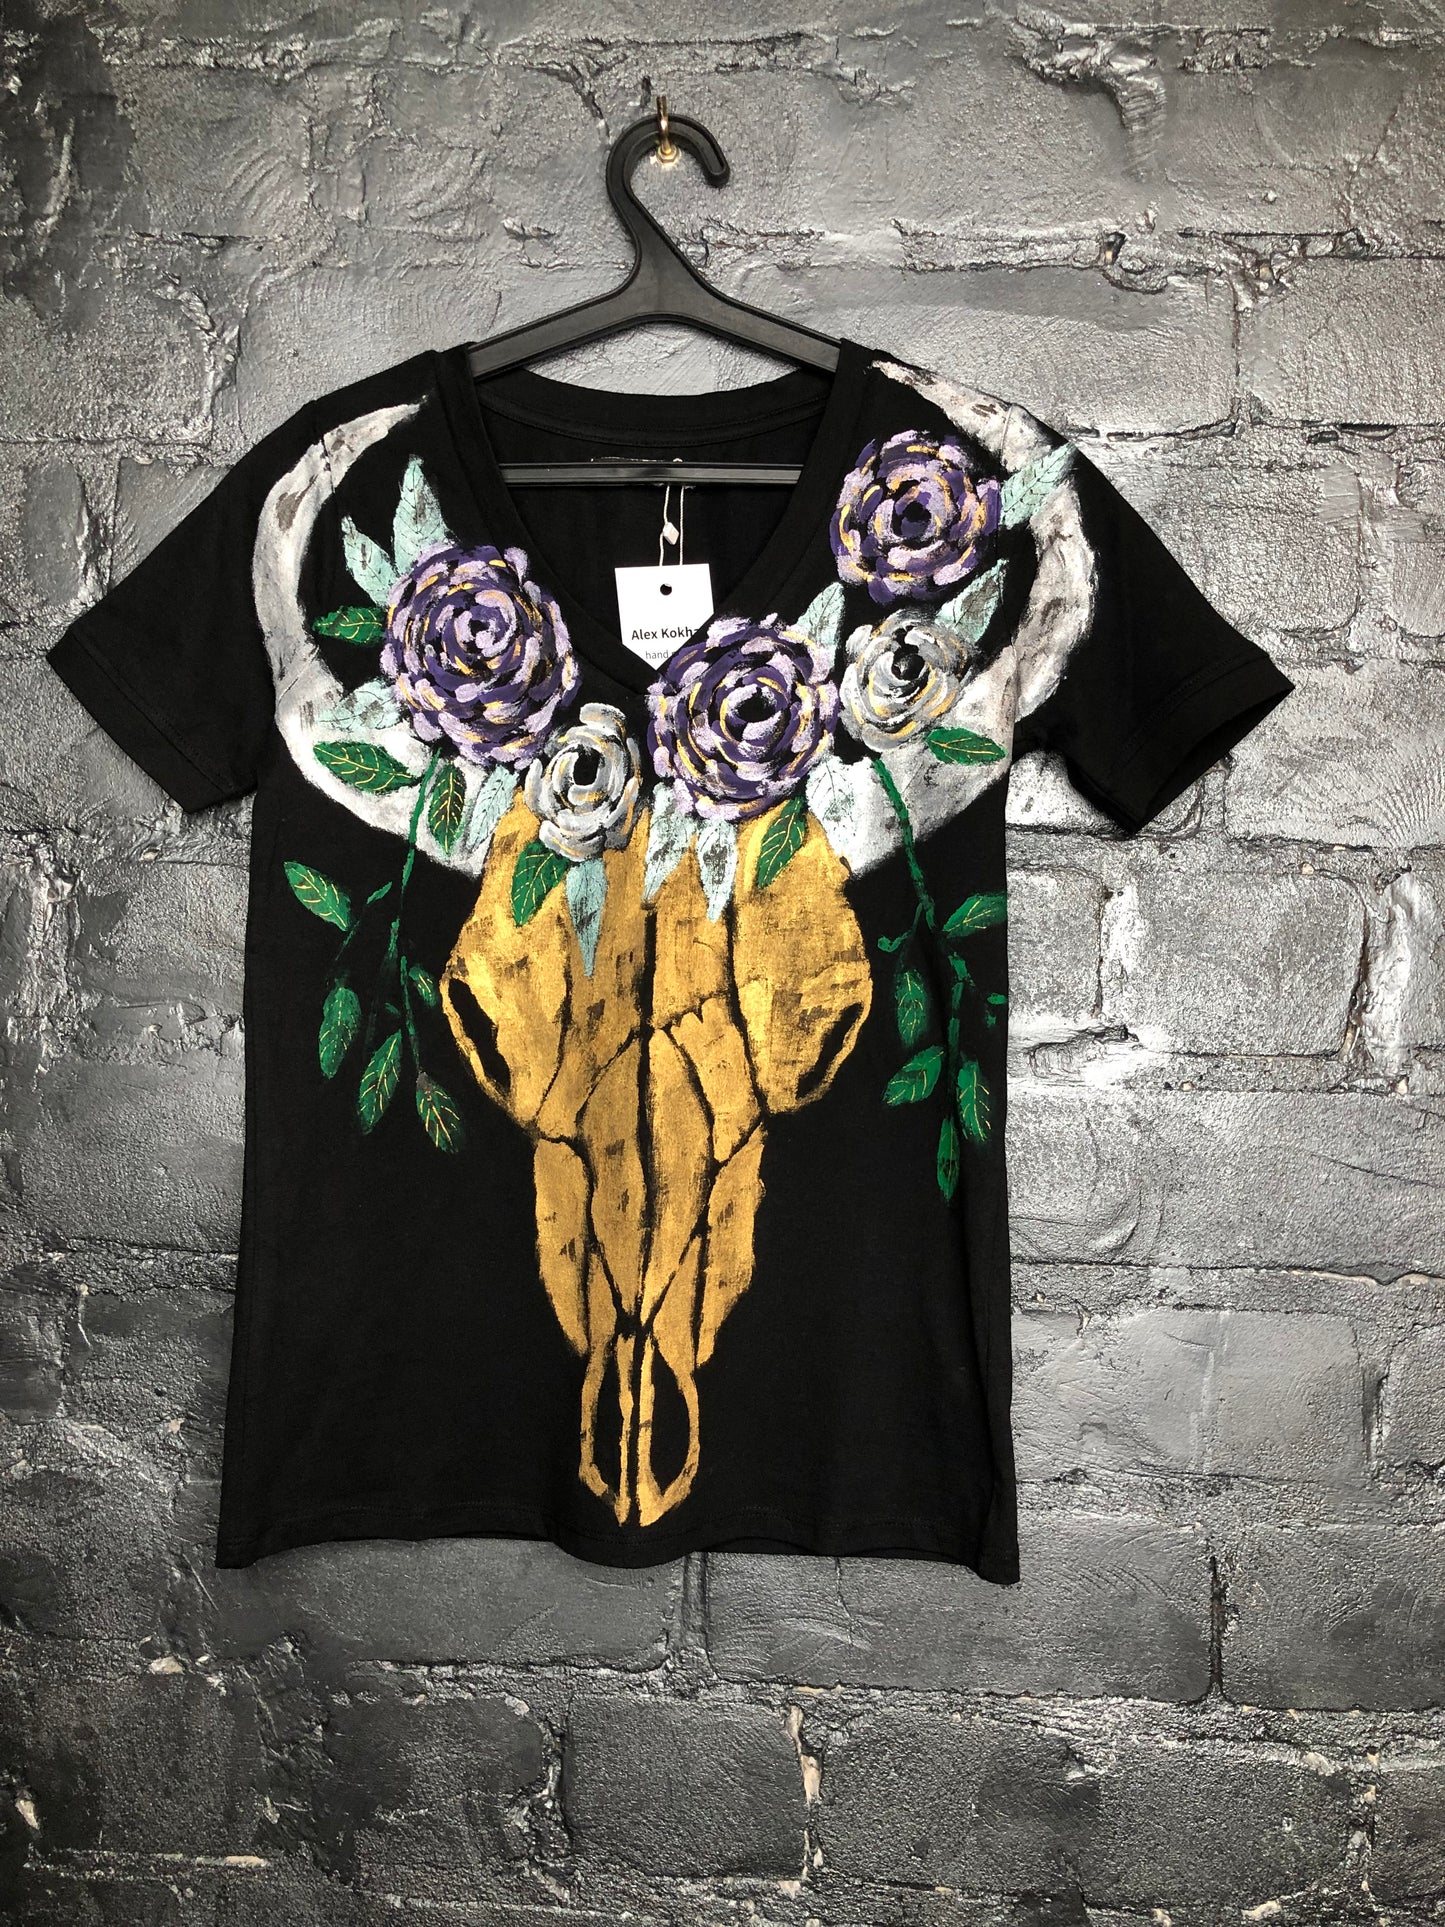 Women's Stylish Black Short Sleeve Golden Cow T-shirt black with a pattern of a skull, horns and flowers.